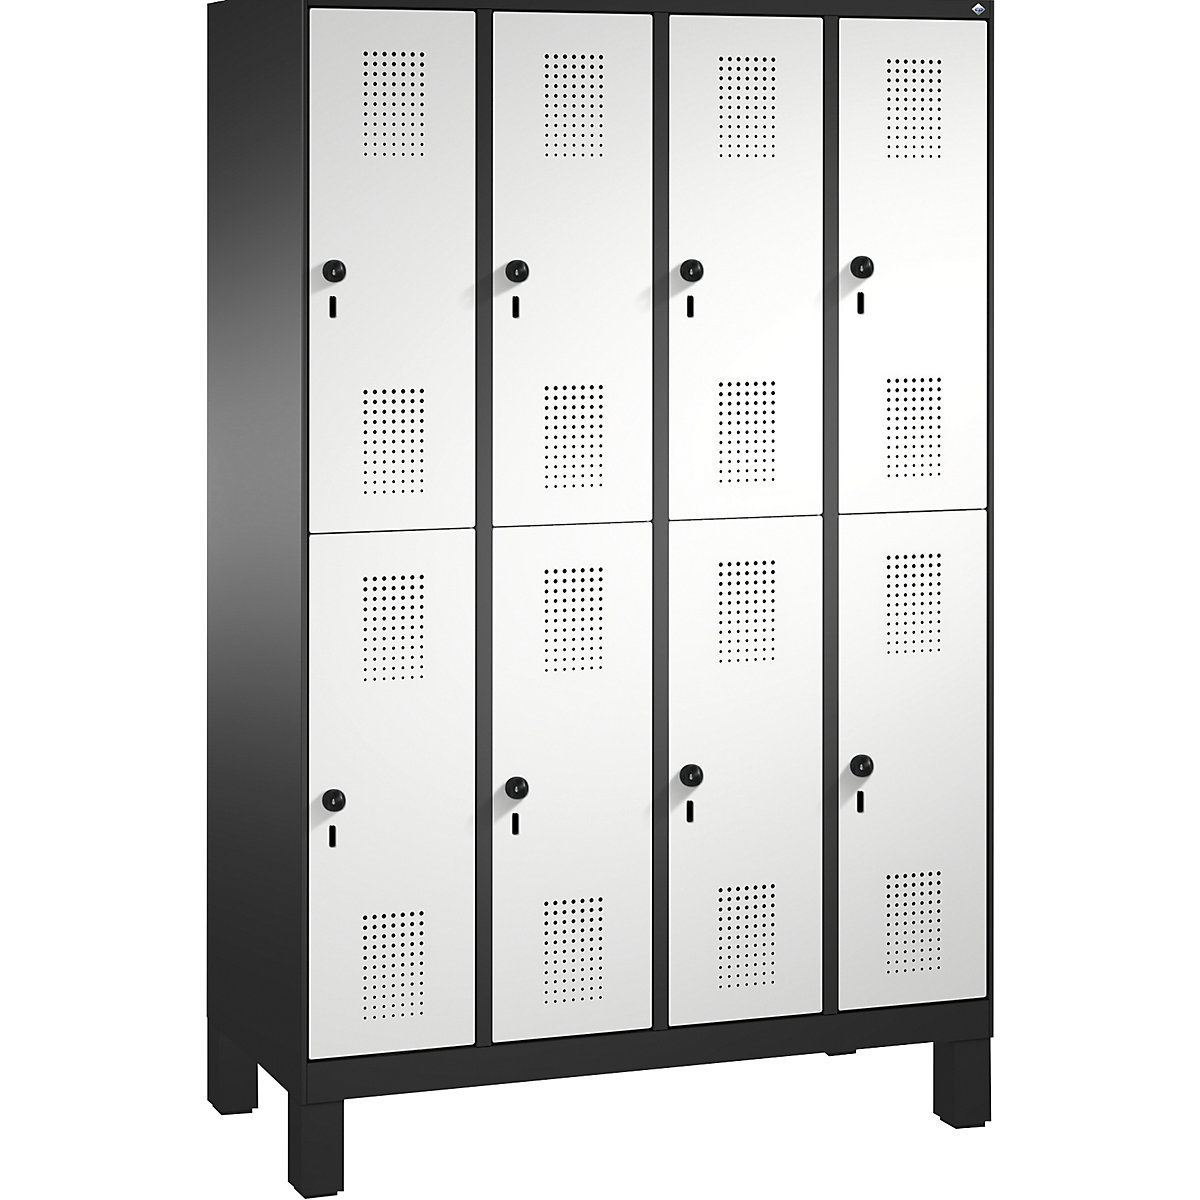 EVOLO cloakroom locker, double tier, with feet – C+P, 4 compartments, 2 shelf compartments each, compartment width 300 mm, black grey / light grey-3